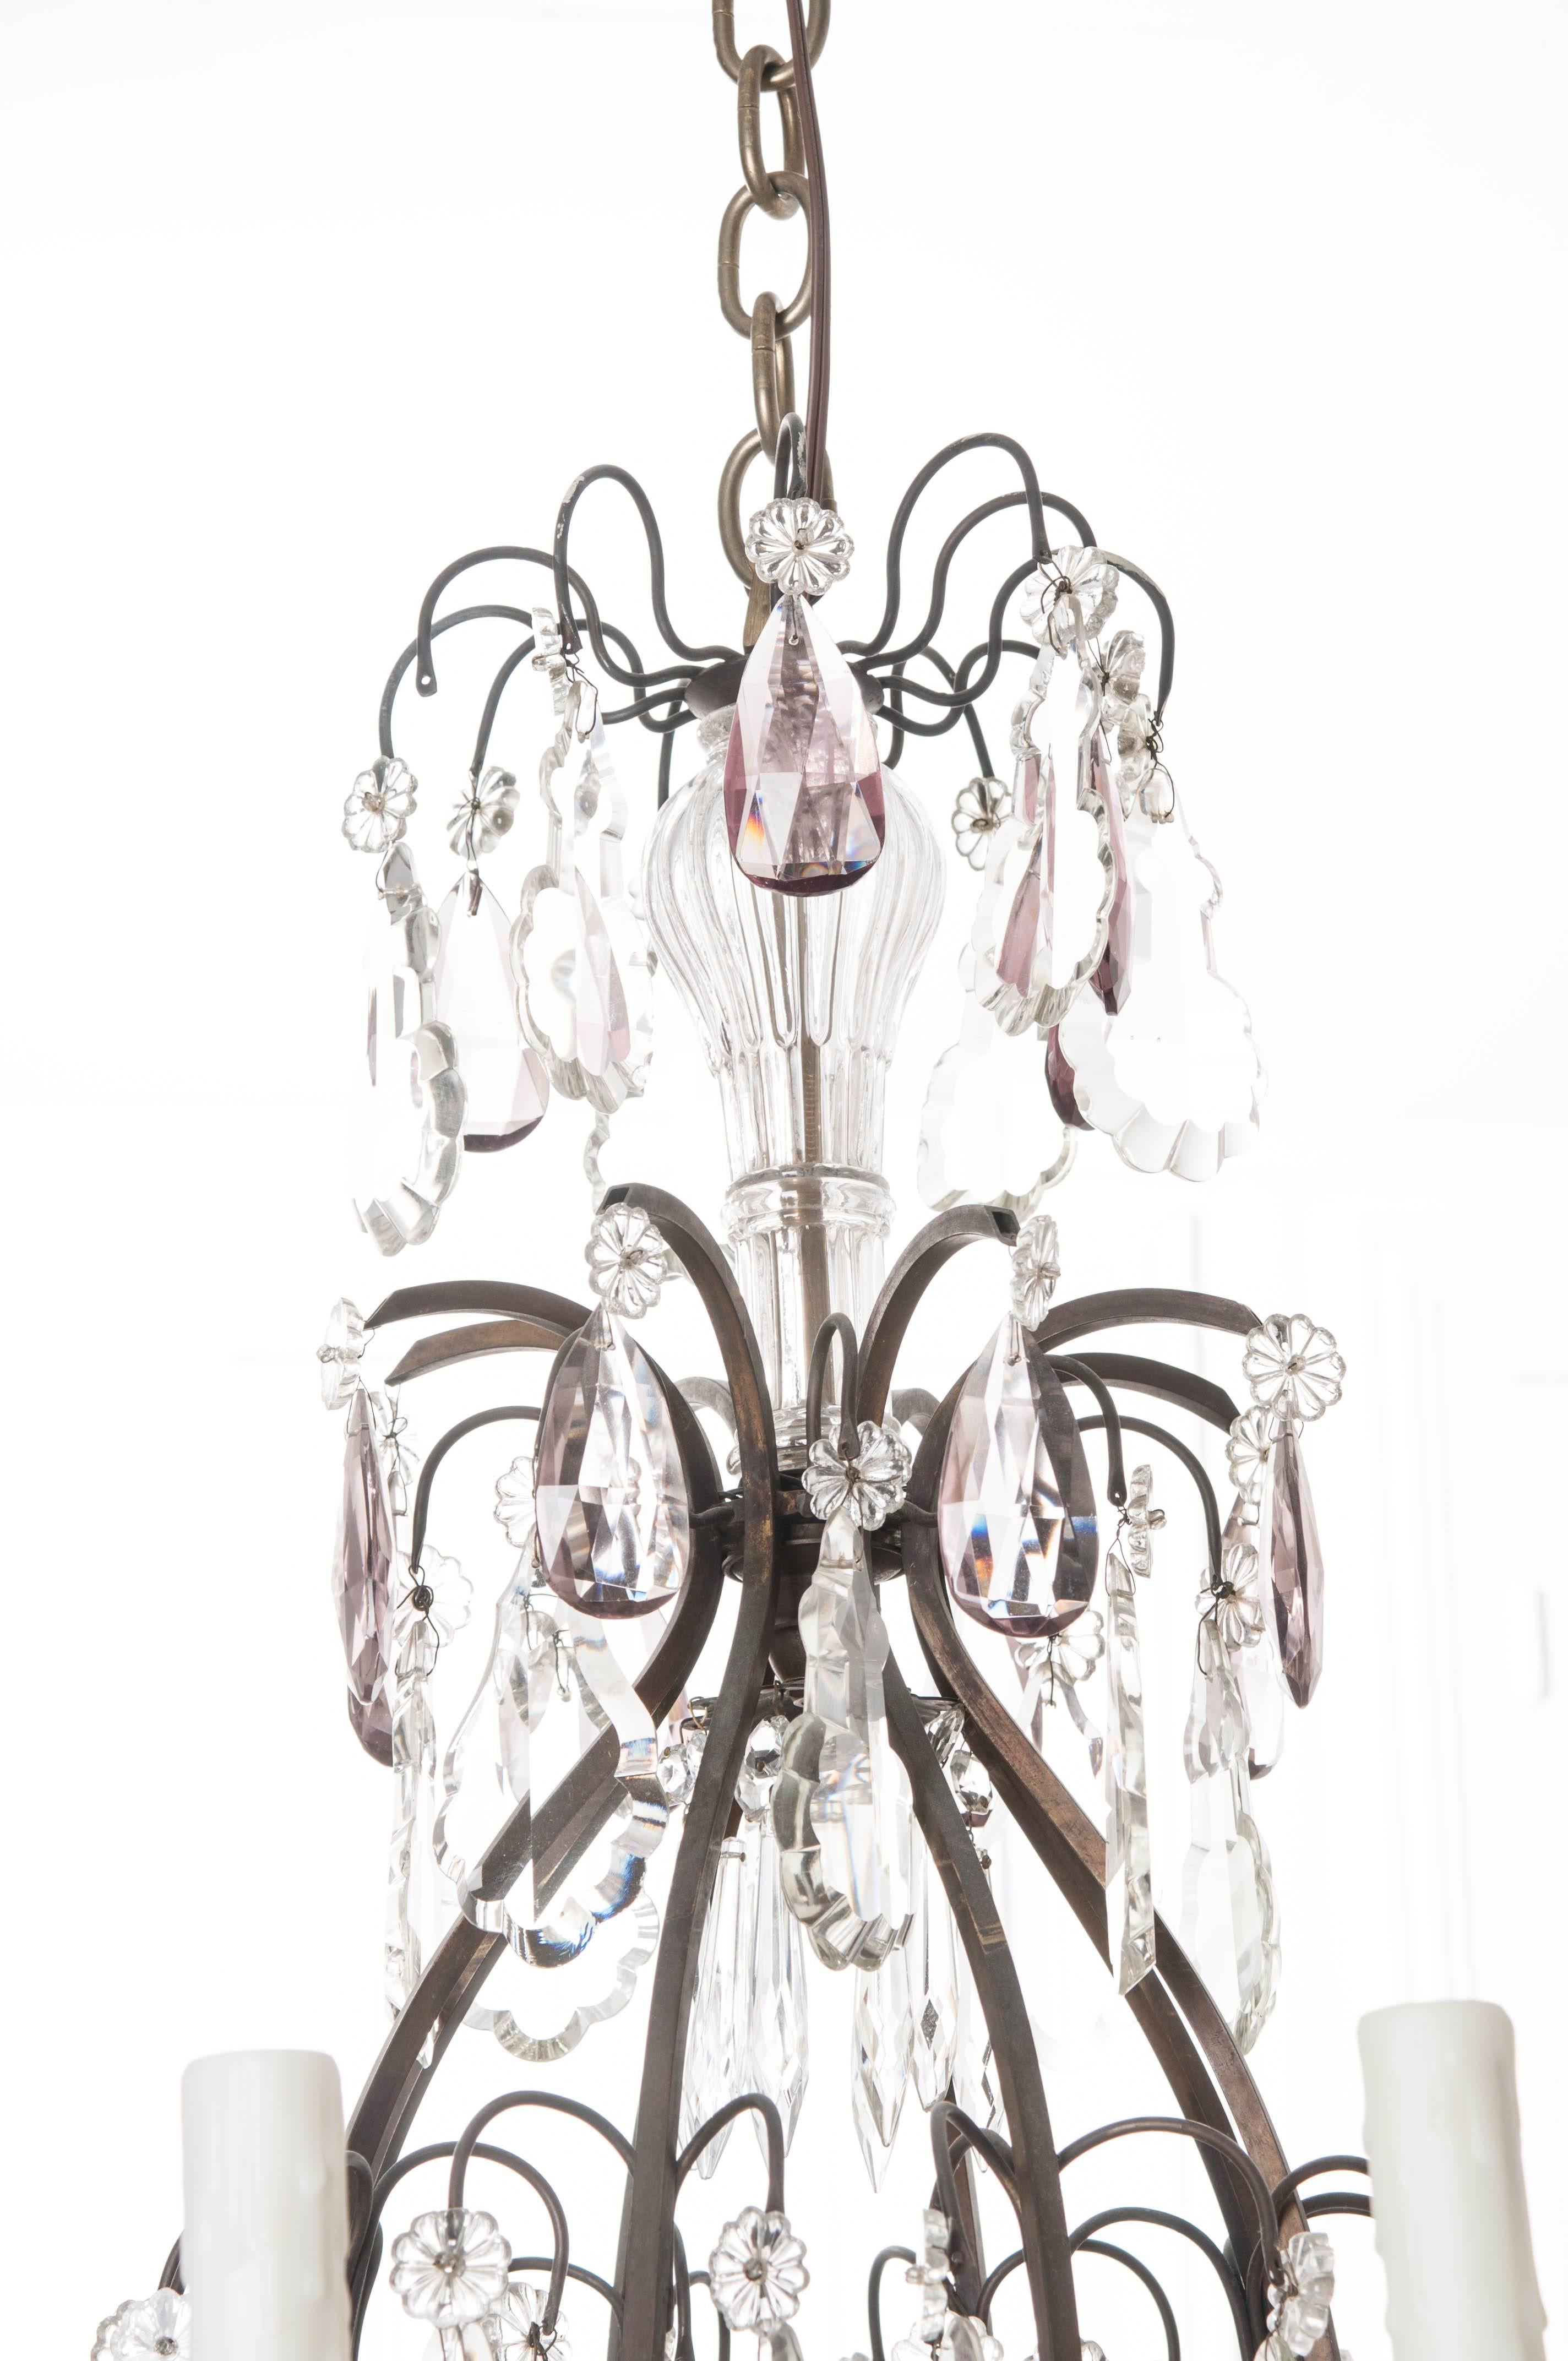 A spectacular 19th century eight light crystal chandelier from France. The metal frame is decorated with crystals, both clear and amethyst in color, and in the form of many different shapes. Each of the eight arms has an ivory candle cover that sits